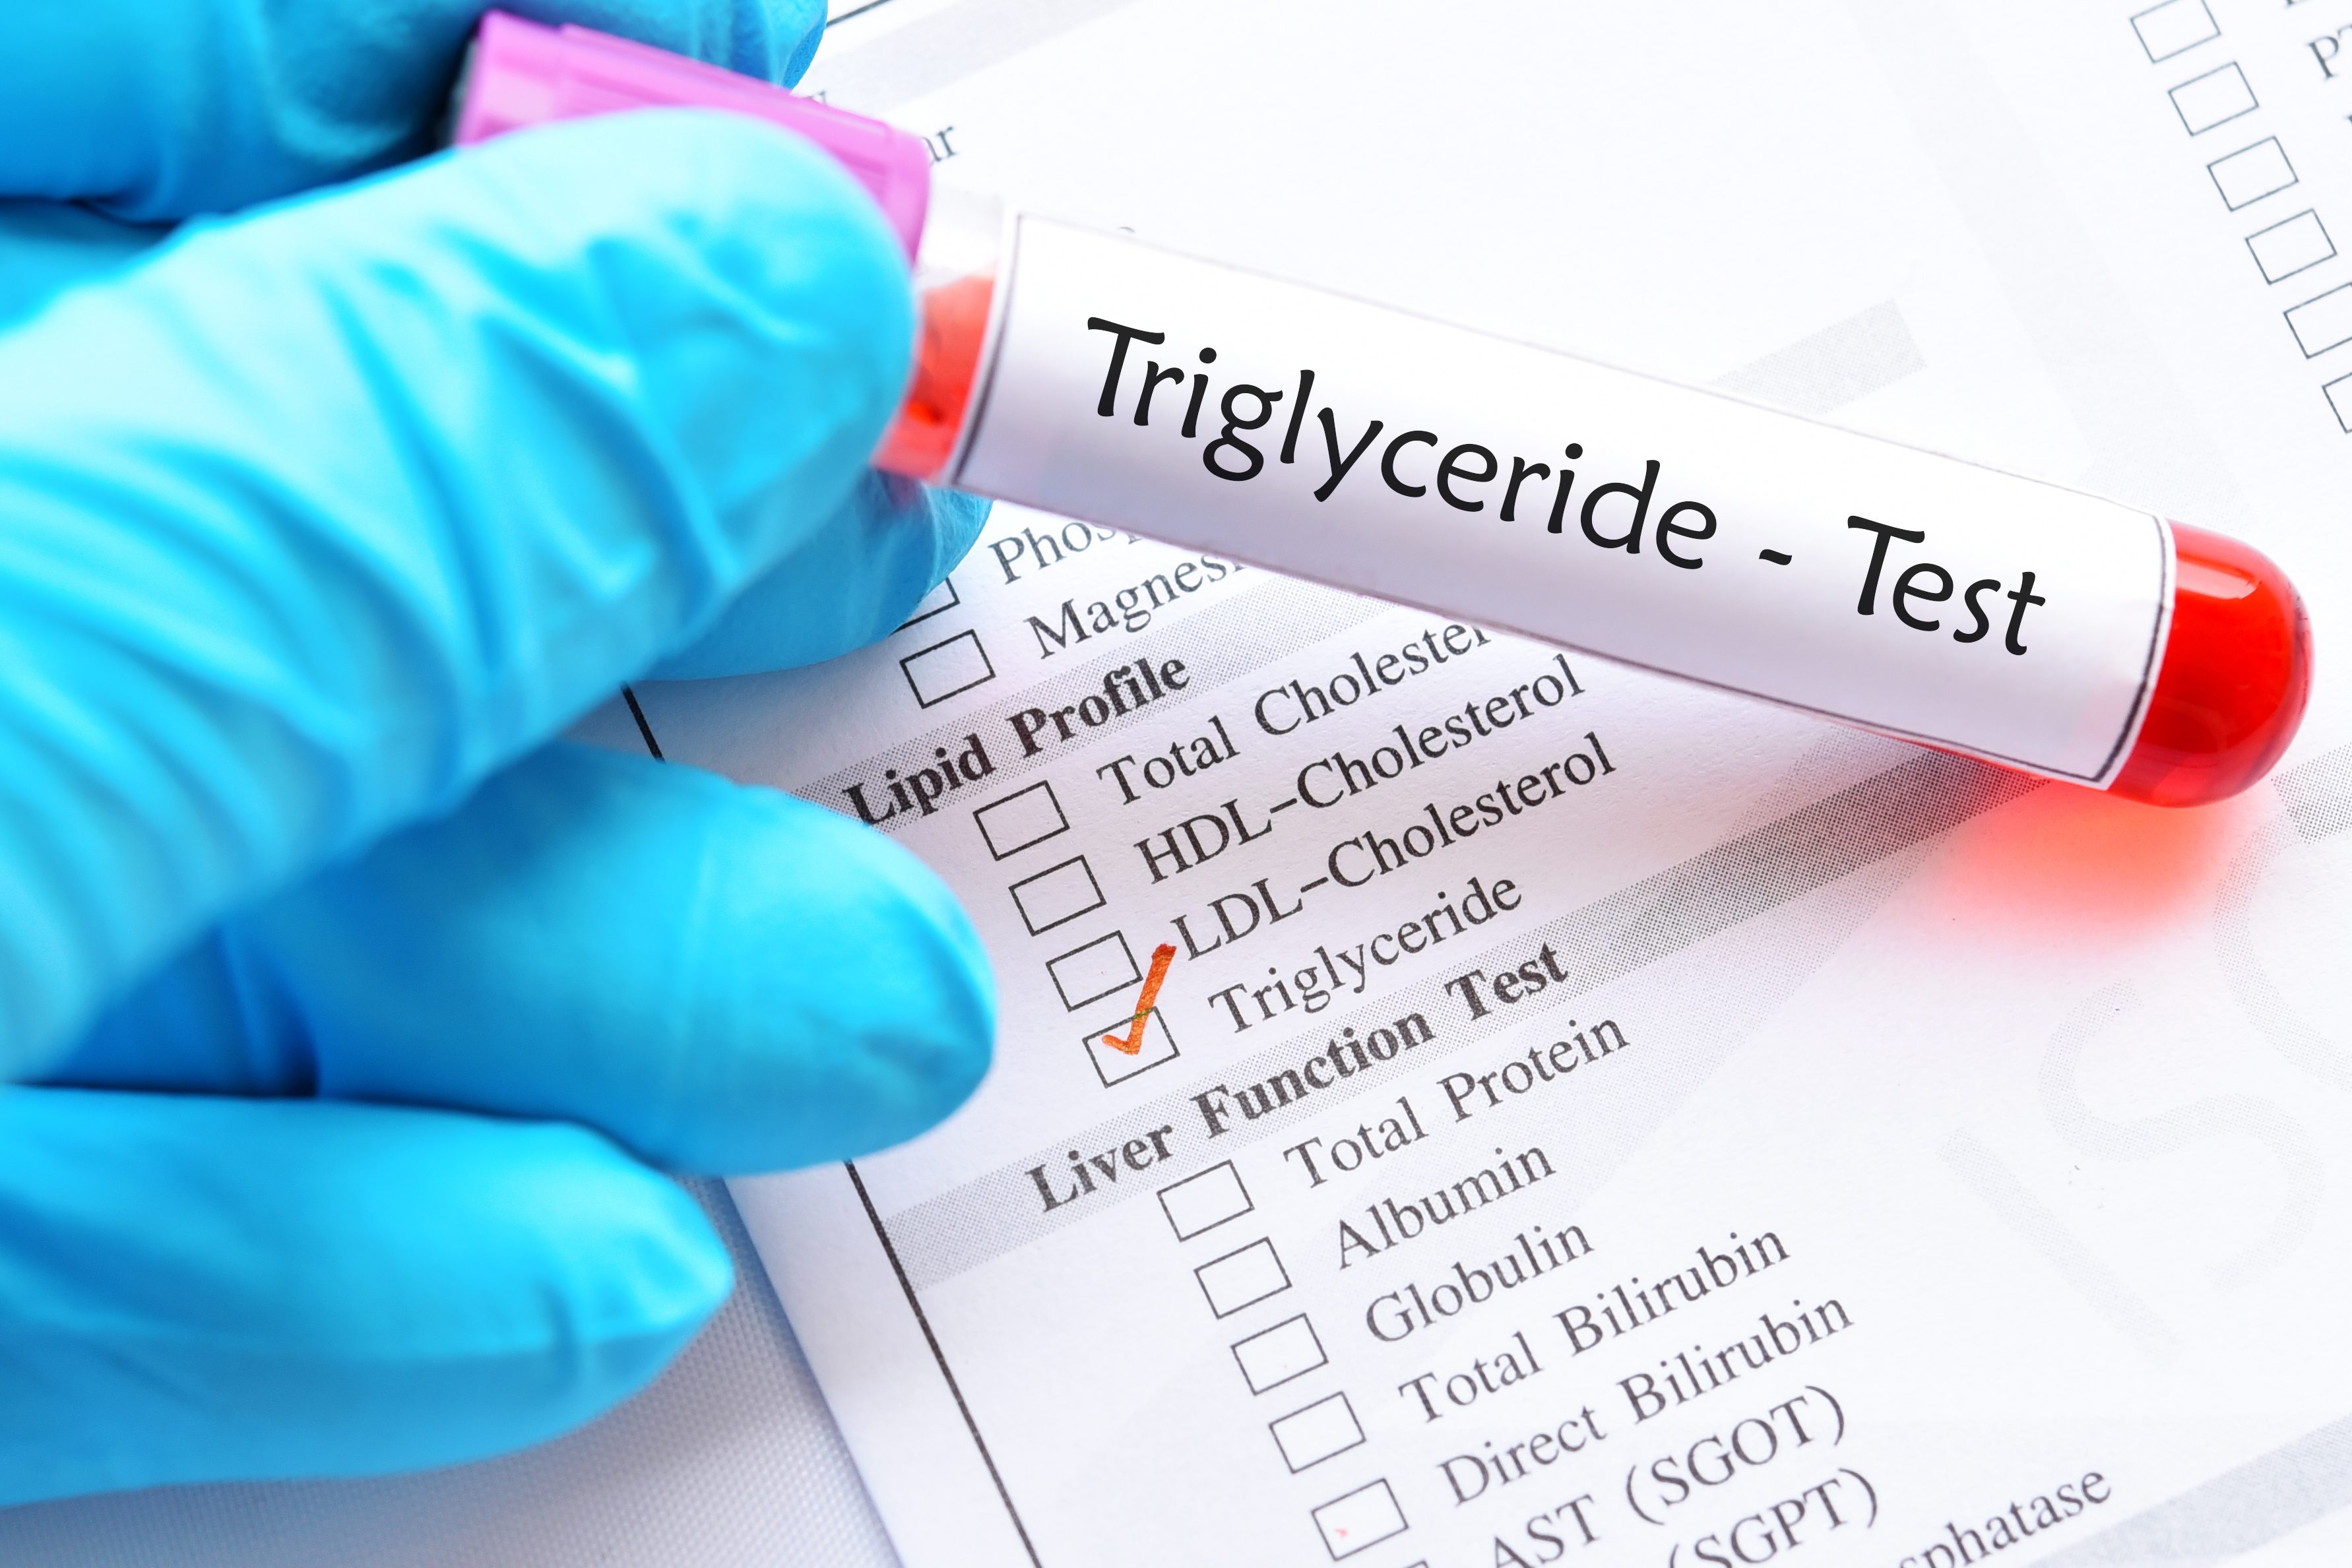 Laboratory requisition form with blood sample tube for triglyceride test